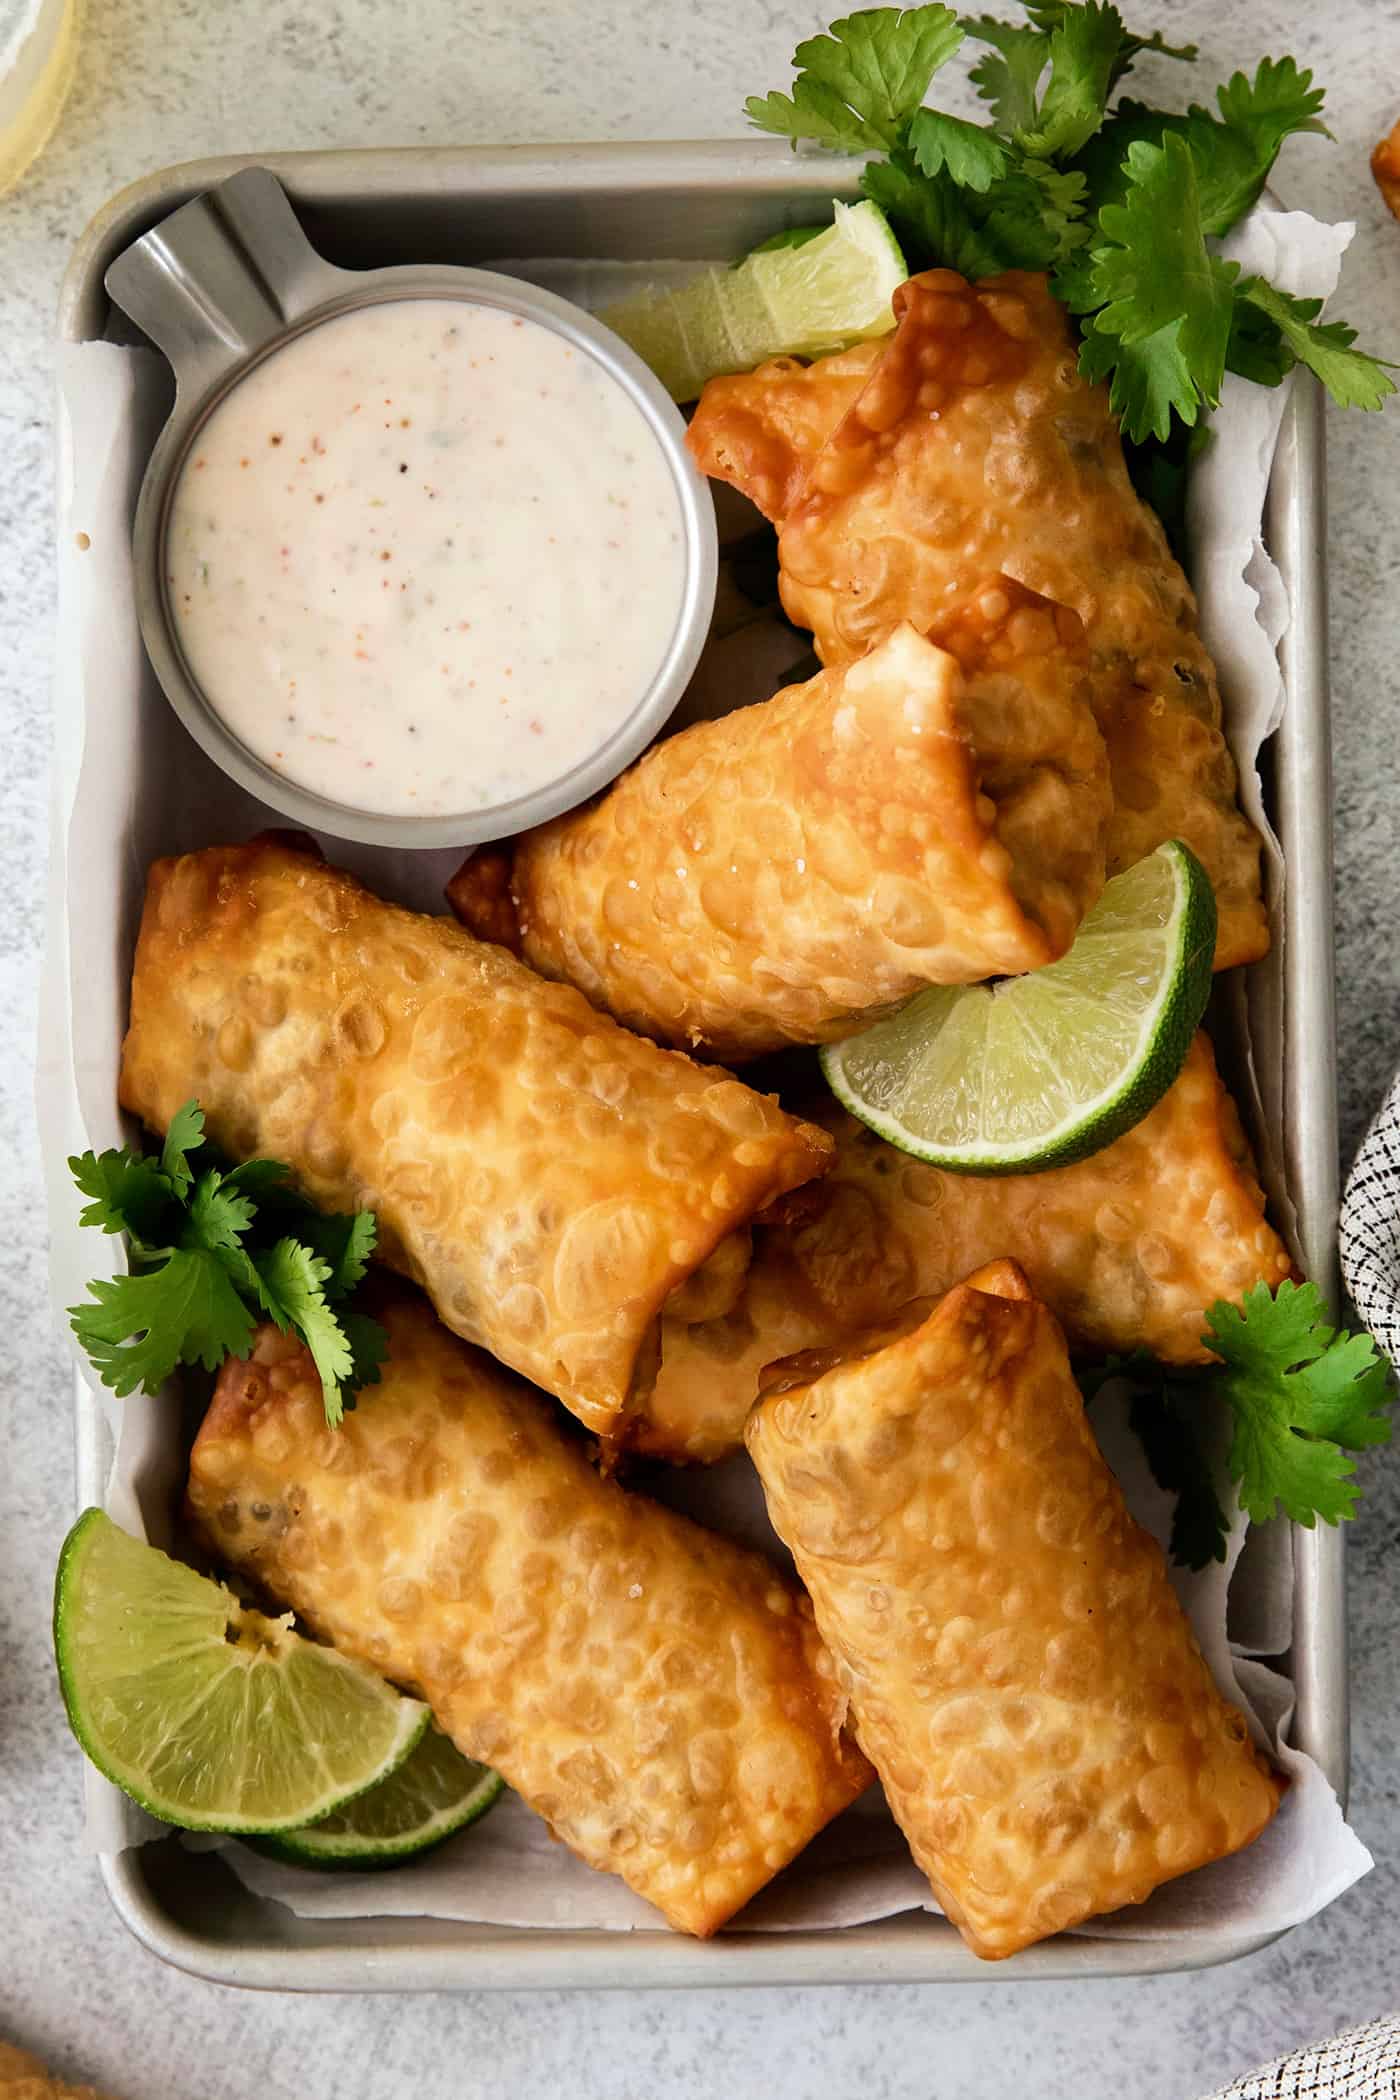 Overhead view of egg rolls on a tray